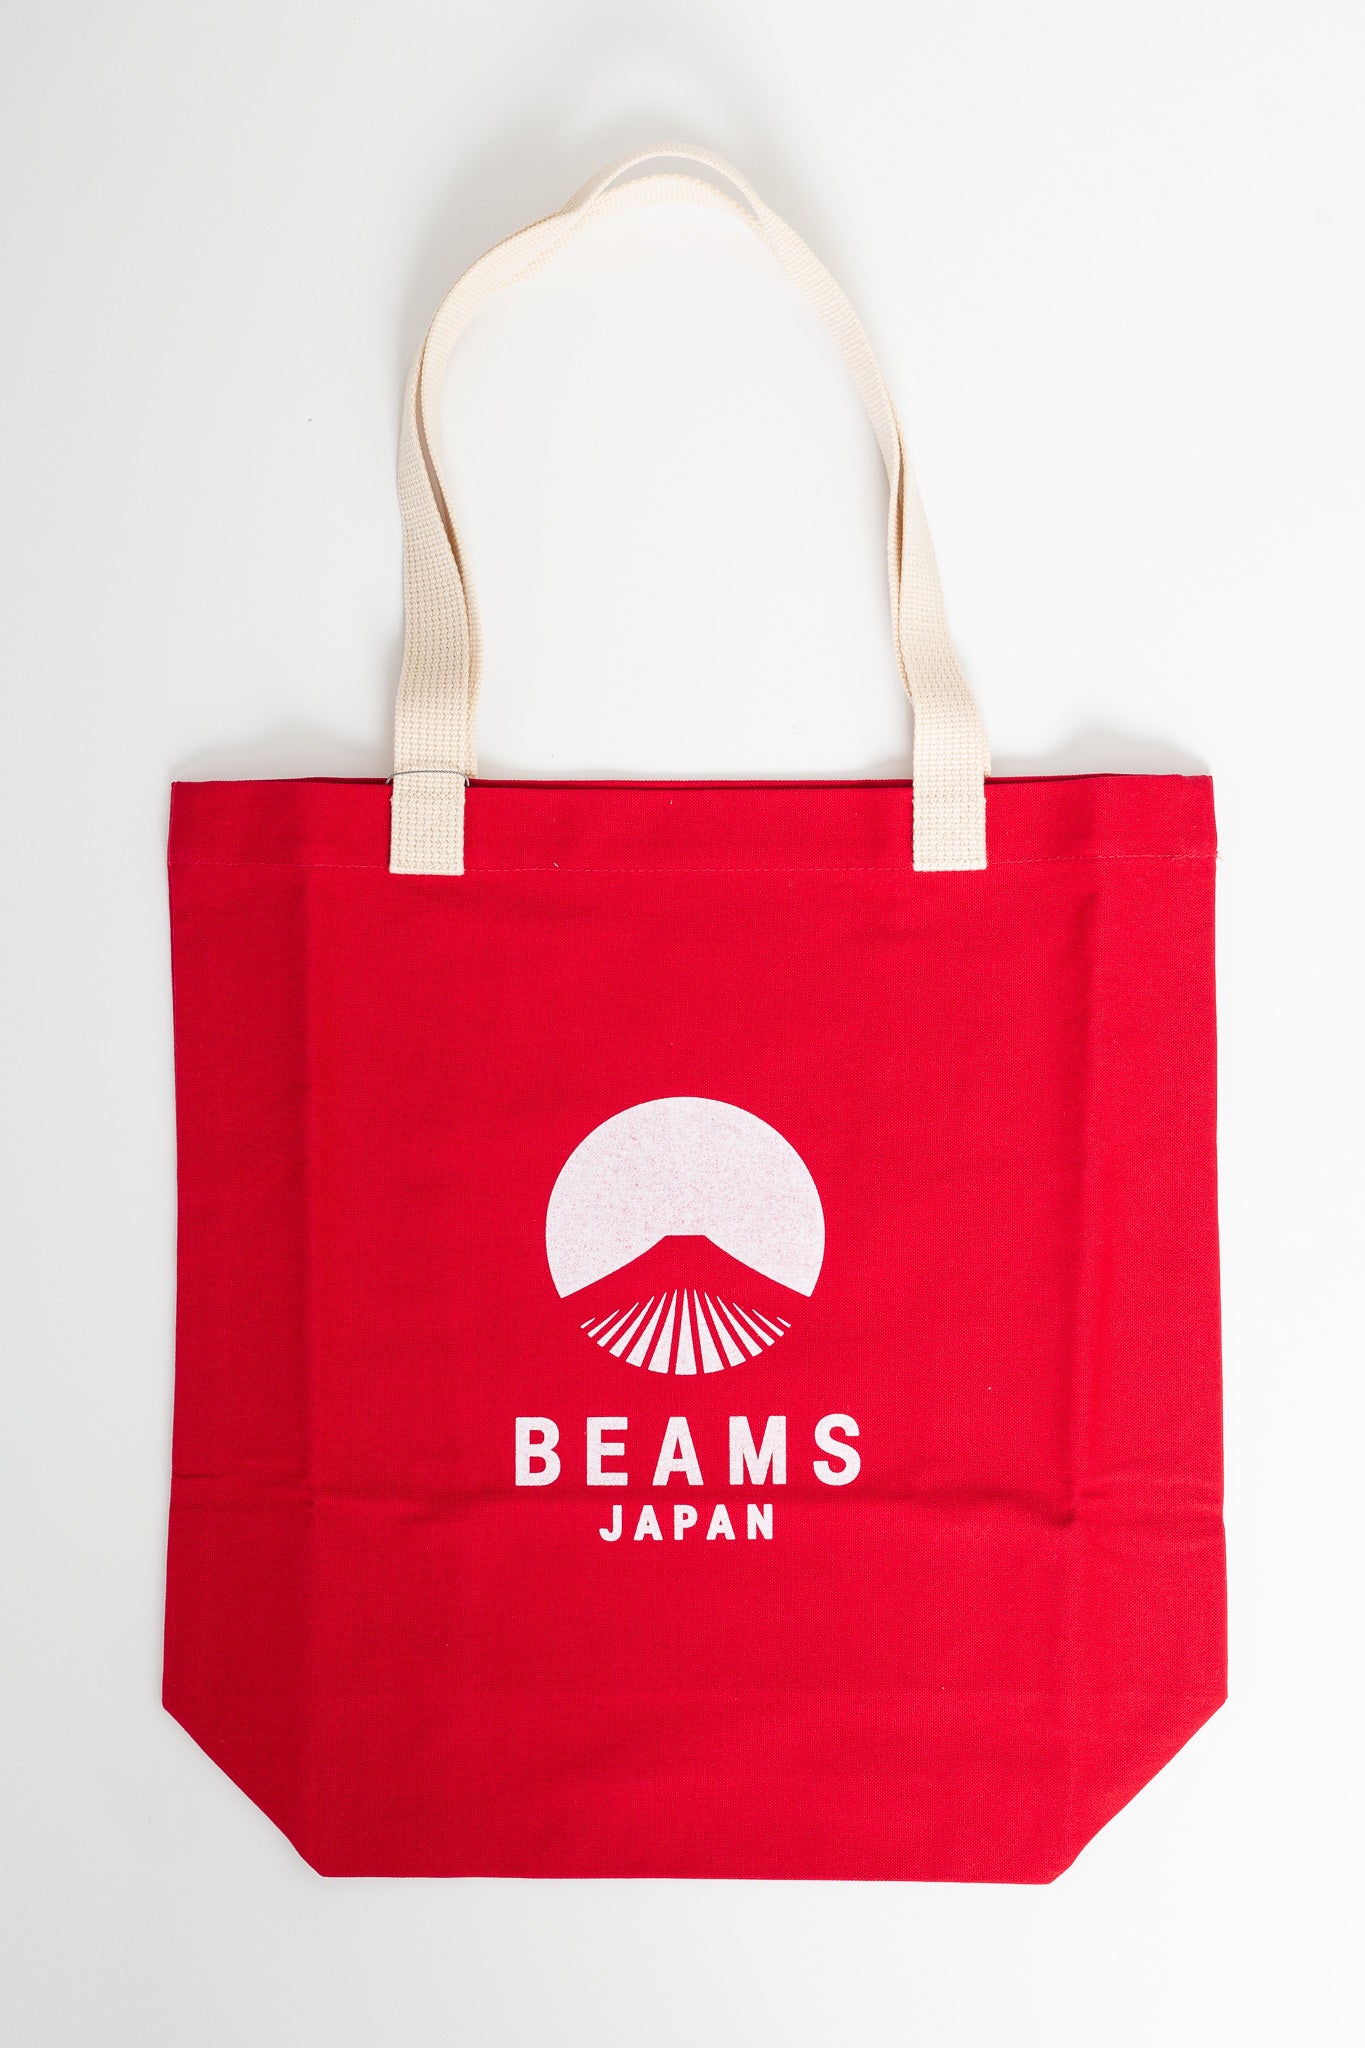 evergreen works x BEAMS JAPAN Tote Bag Color - Red